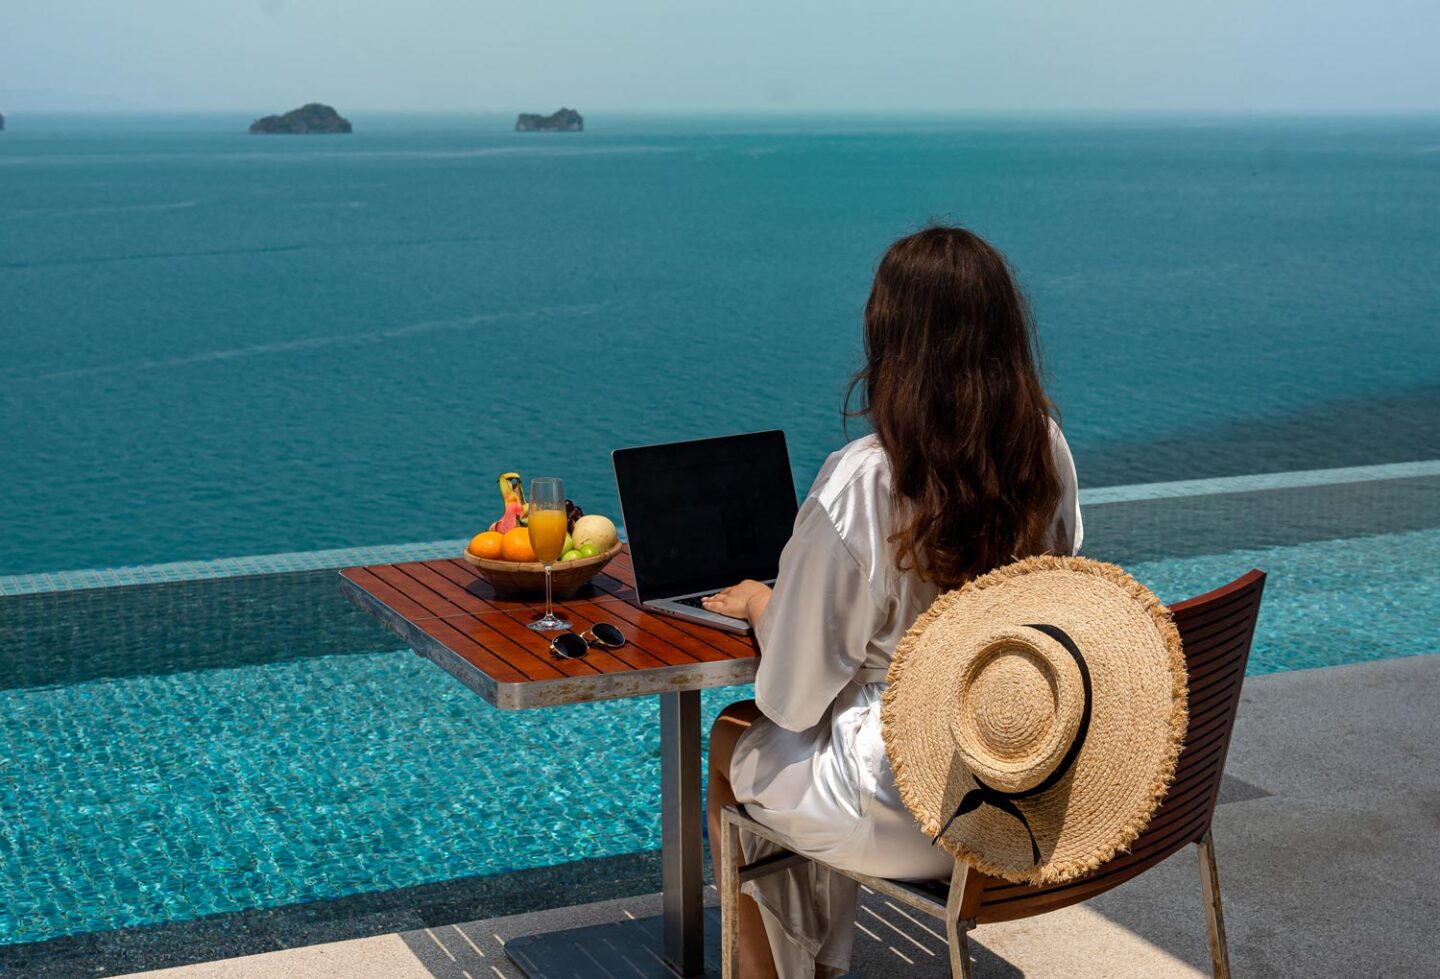 A woman wearing a white robe sits at a table by an infinity pool overlooking the ocean, working on a laptop. A straw hat rests on the back of her chair, and a bowl of fresh fruit and a glass of juice are on the table, suggesting a relaxing yet productive setting